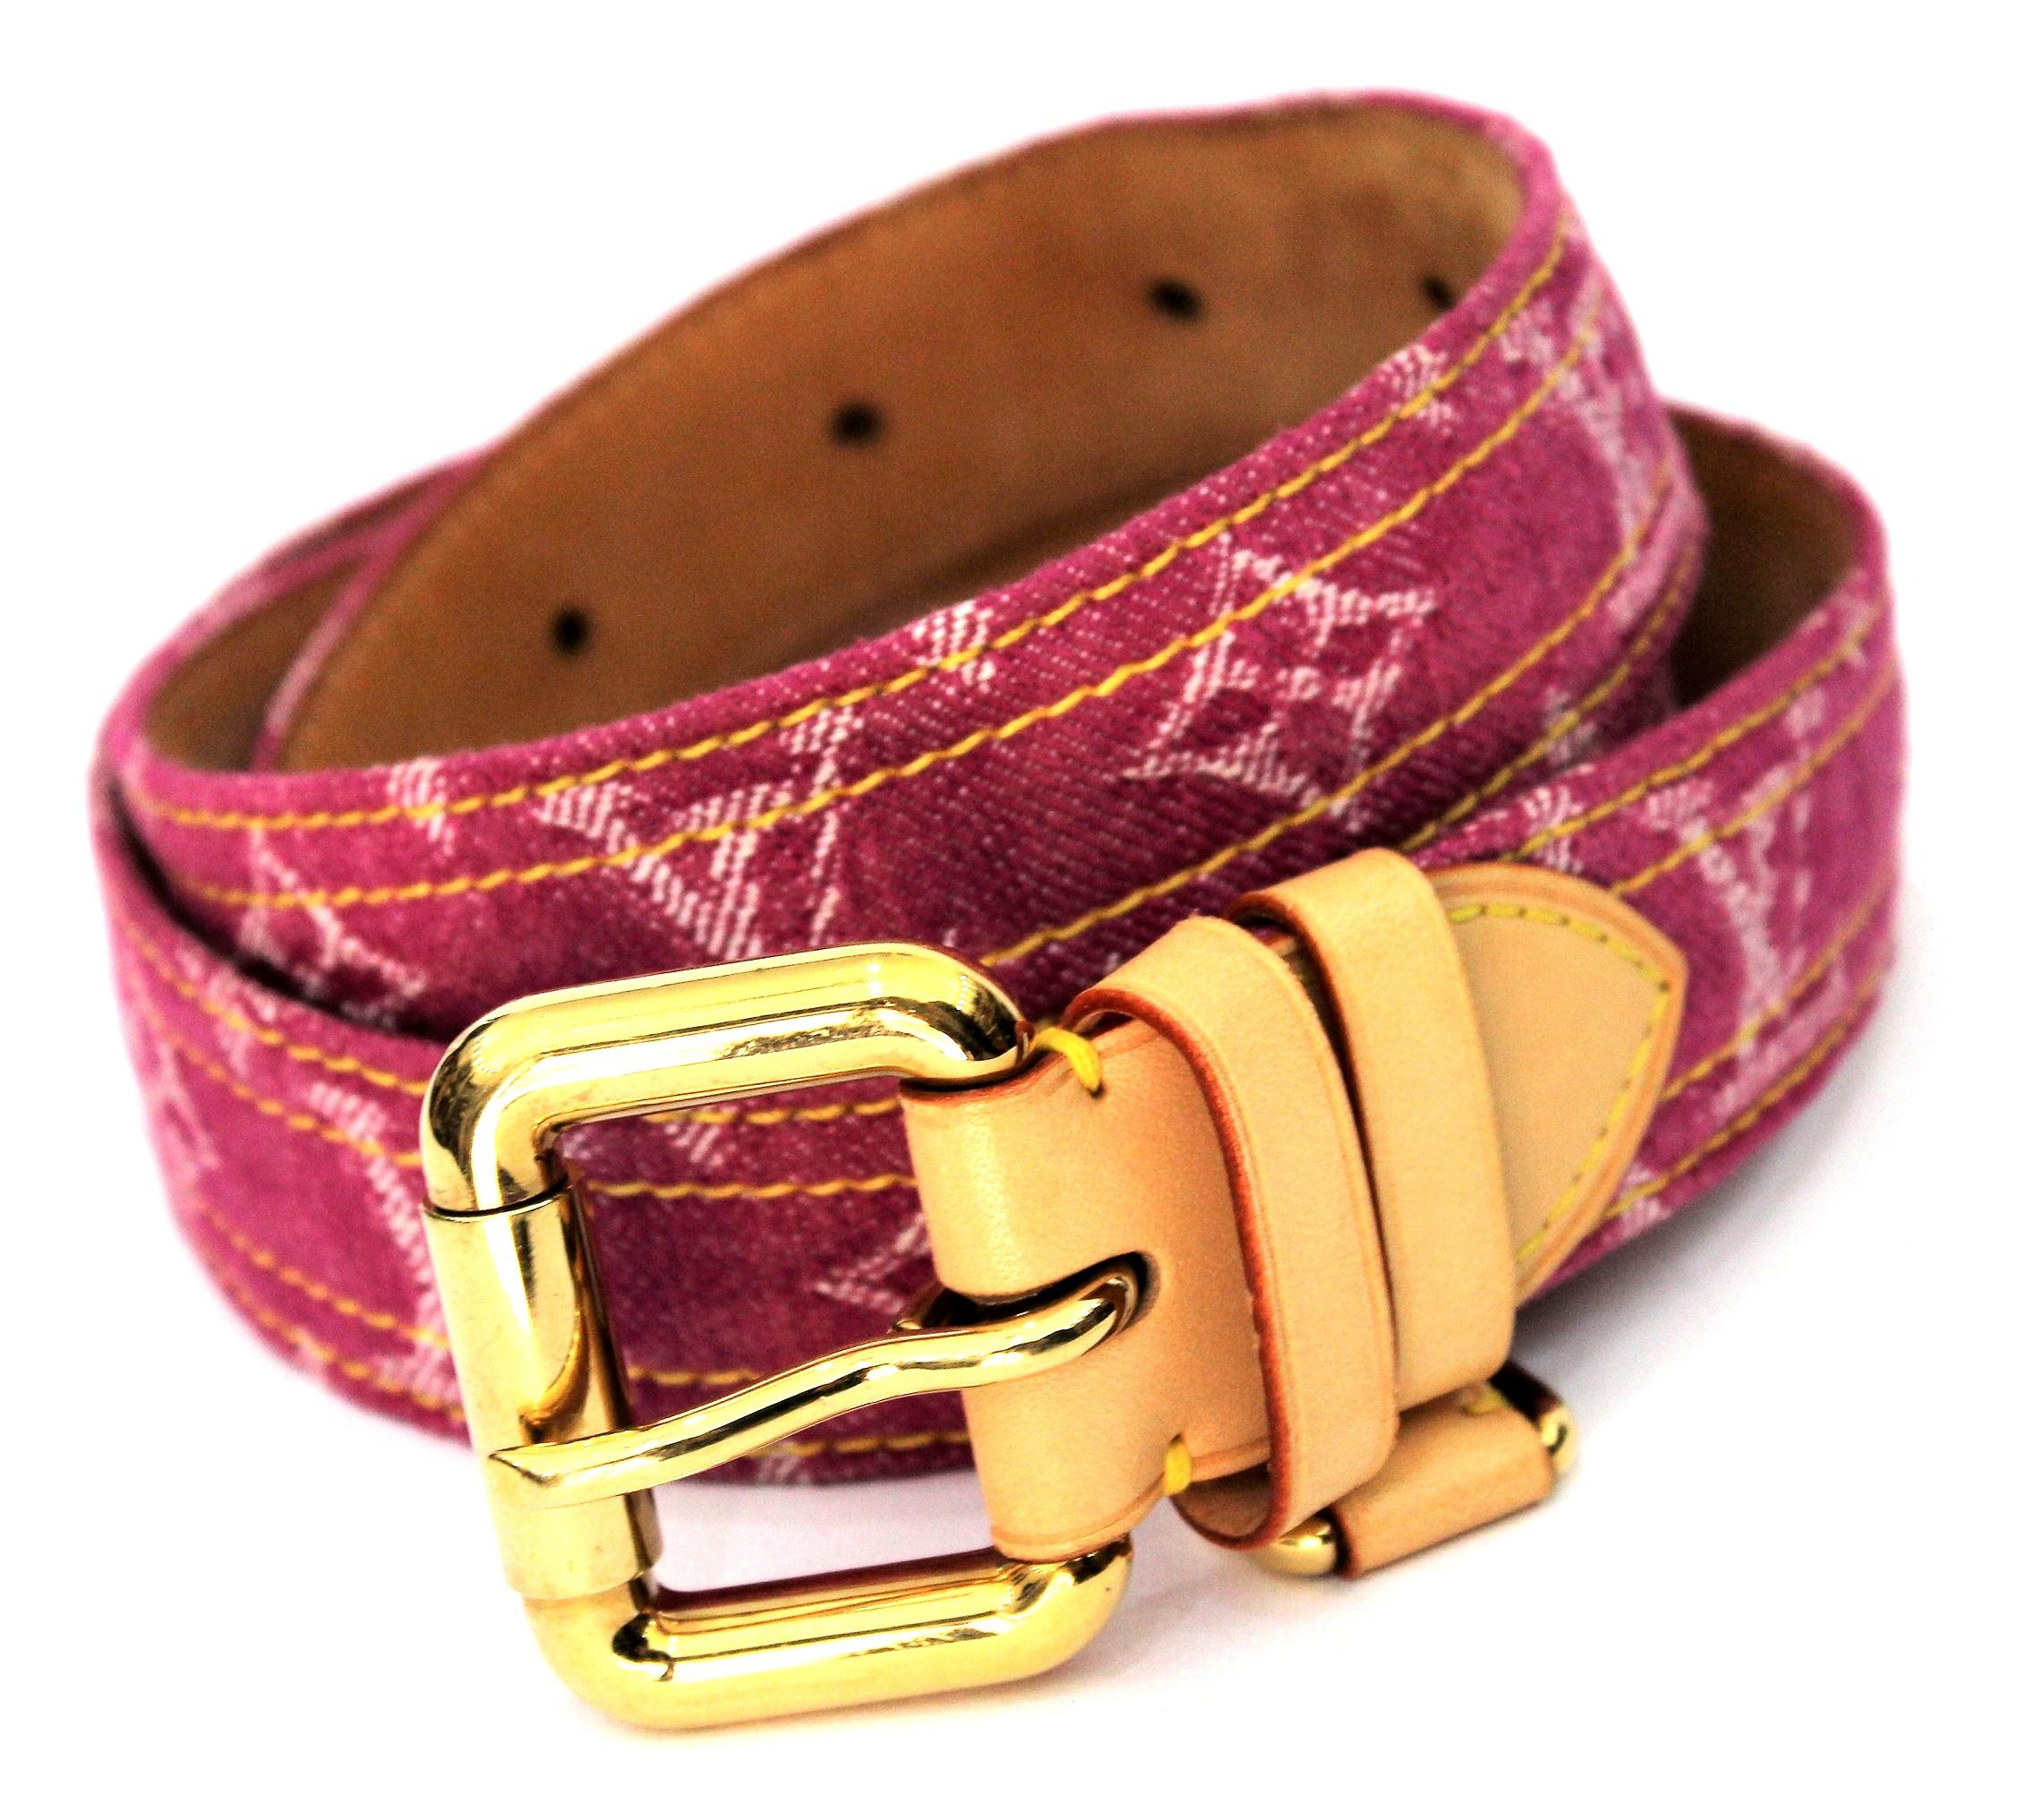 Chic and elegant is this Louis Vuitton belt! Made of monogram denim, this belt is adorned with beige leather and gold buckle front. Perfect for making your outfit more extravagant. Size 90/36.